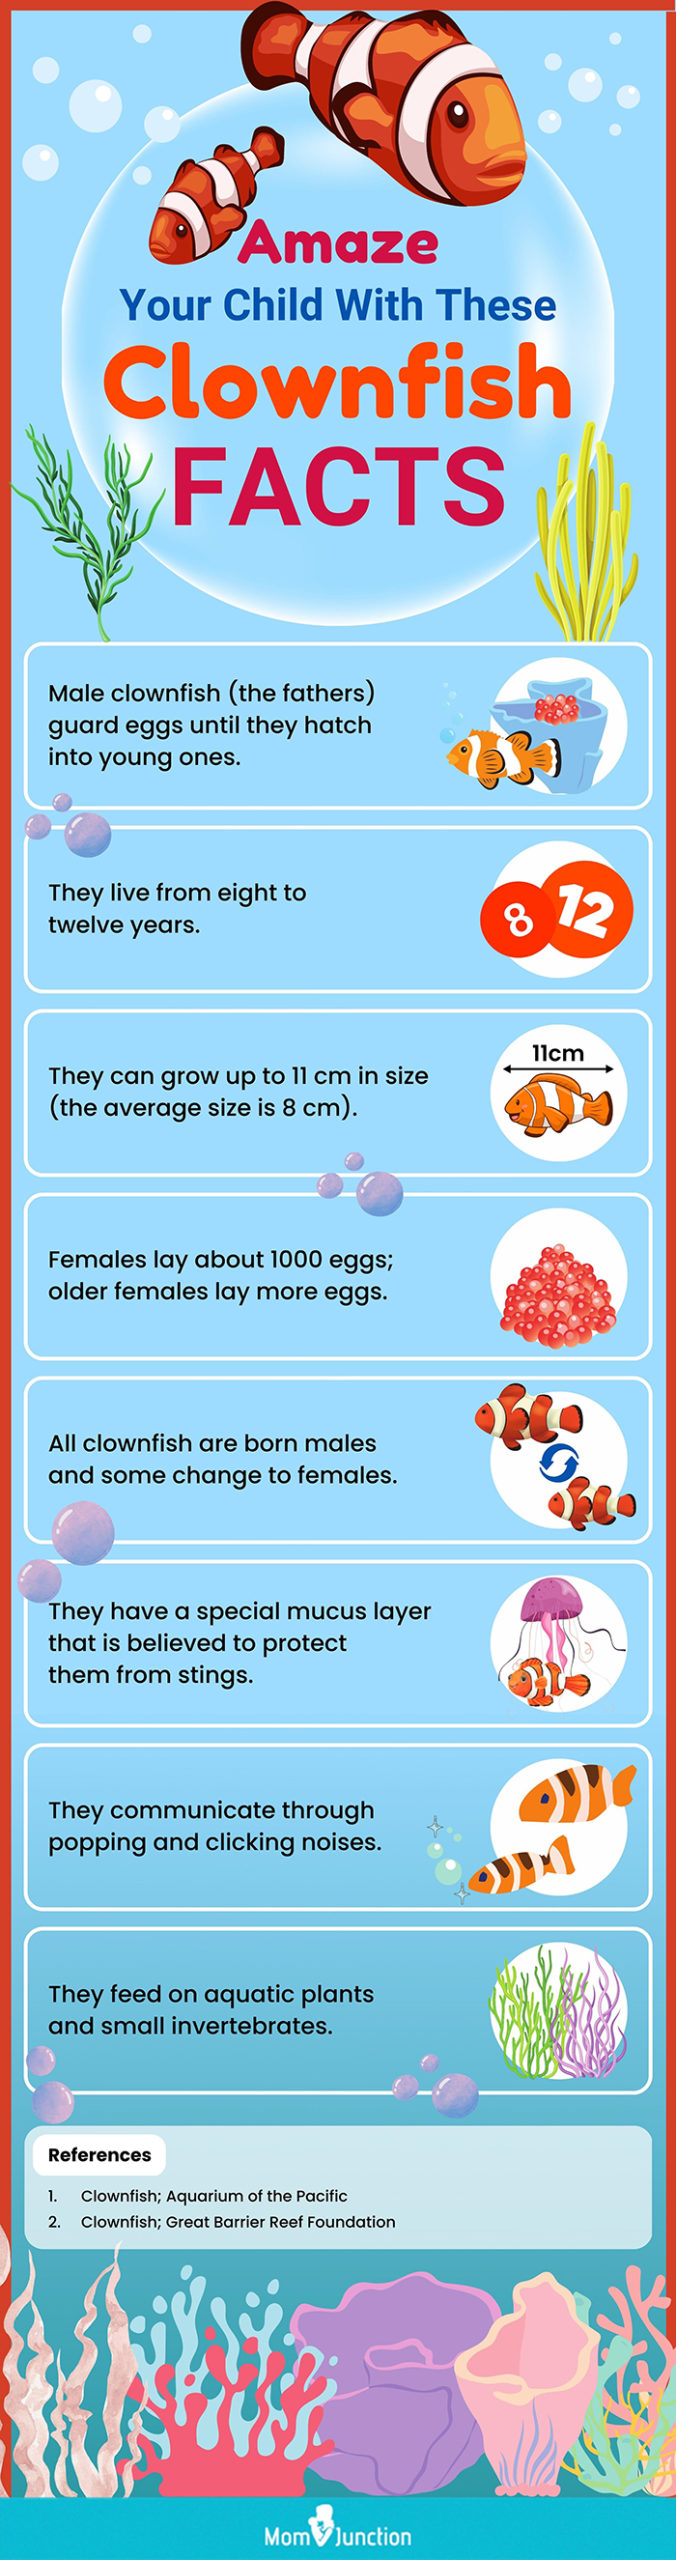 amaze your child with these clownfish facts (infographic)